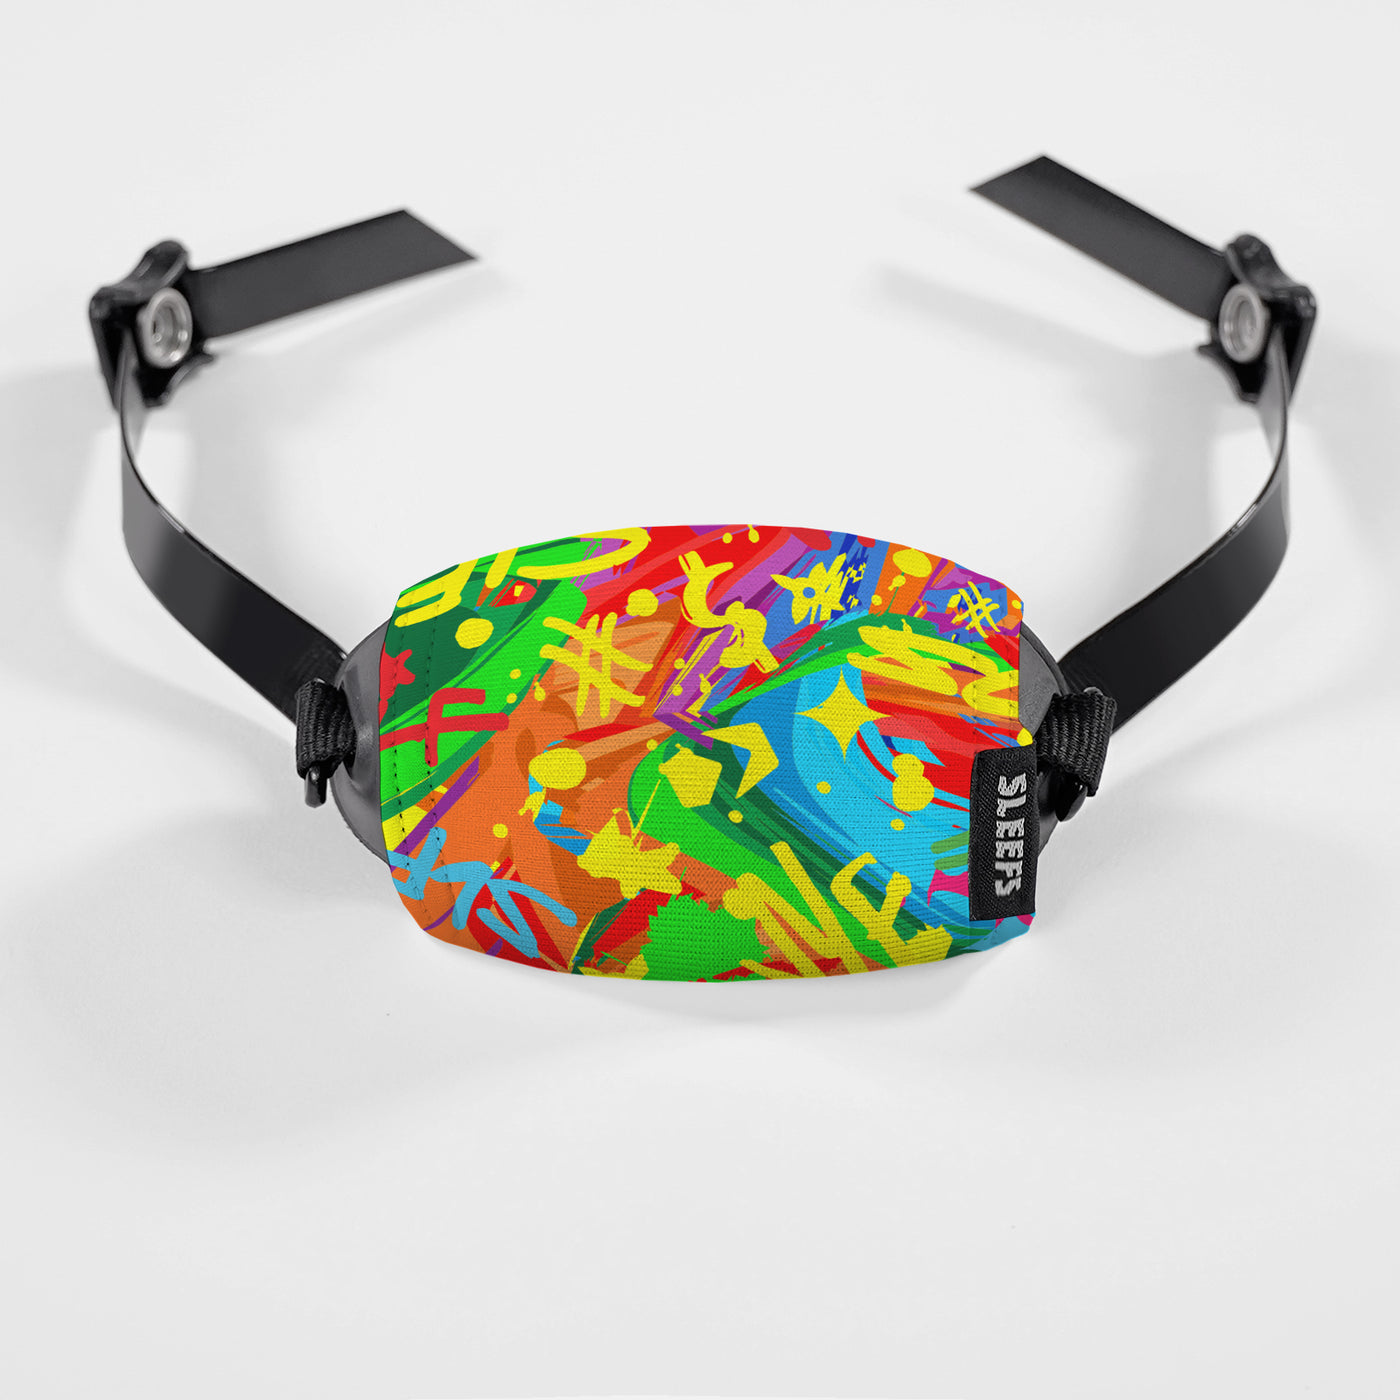 SLF Milan Colorful Chin Strap Cover